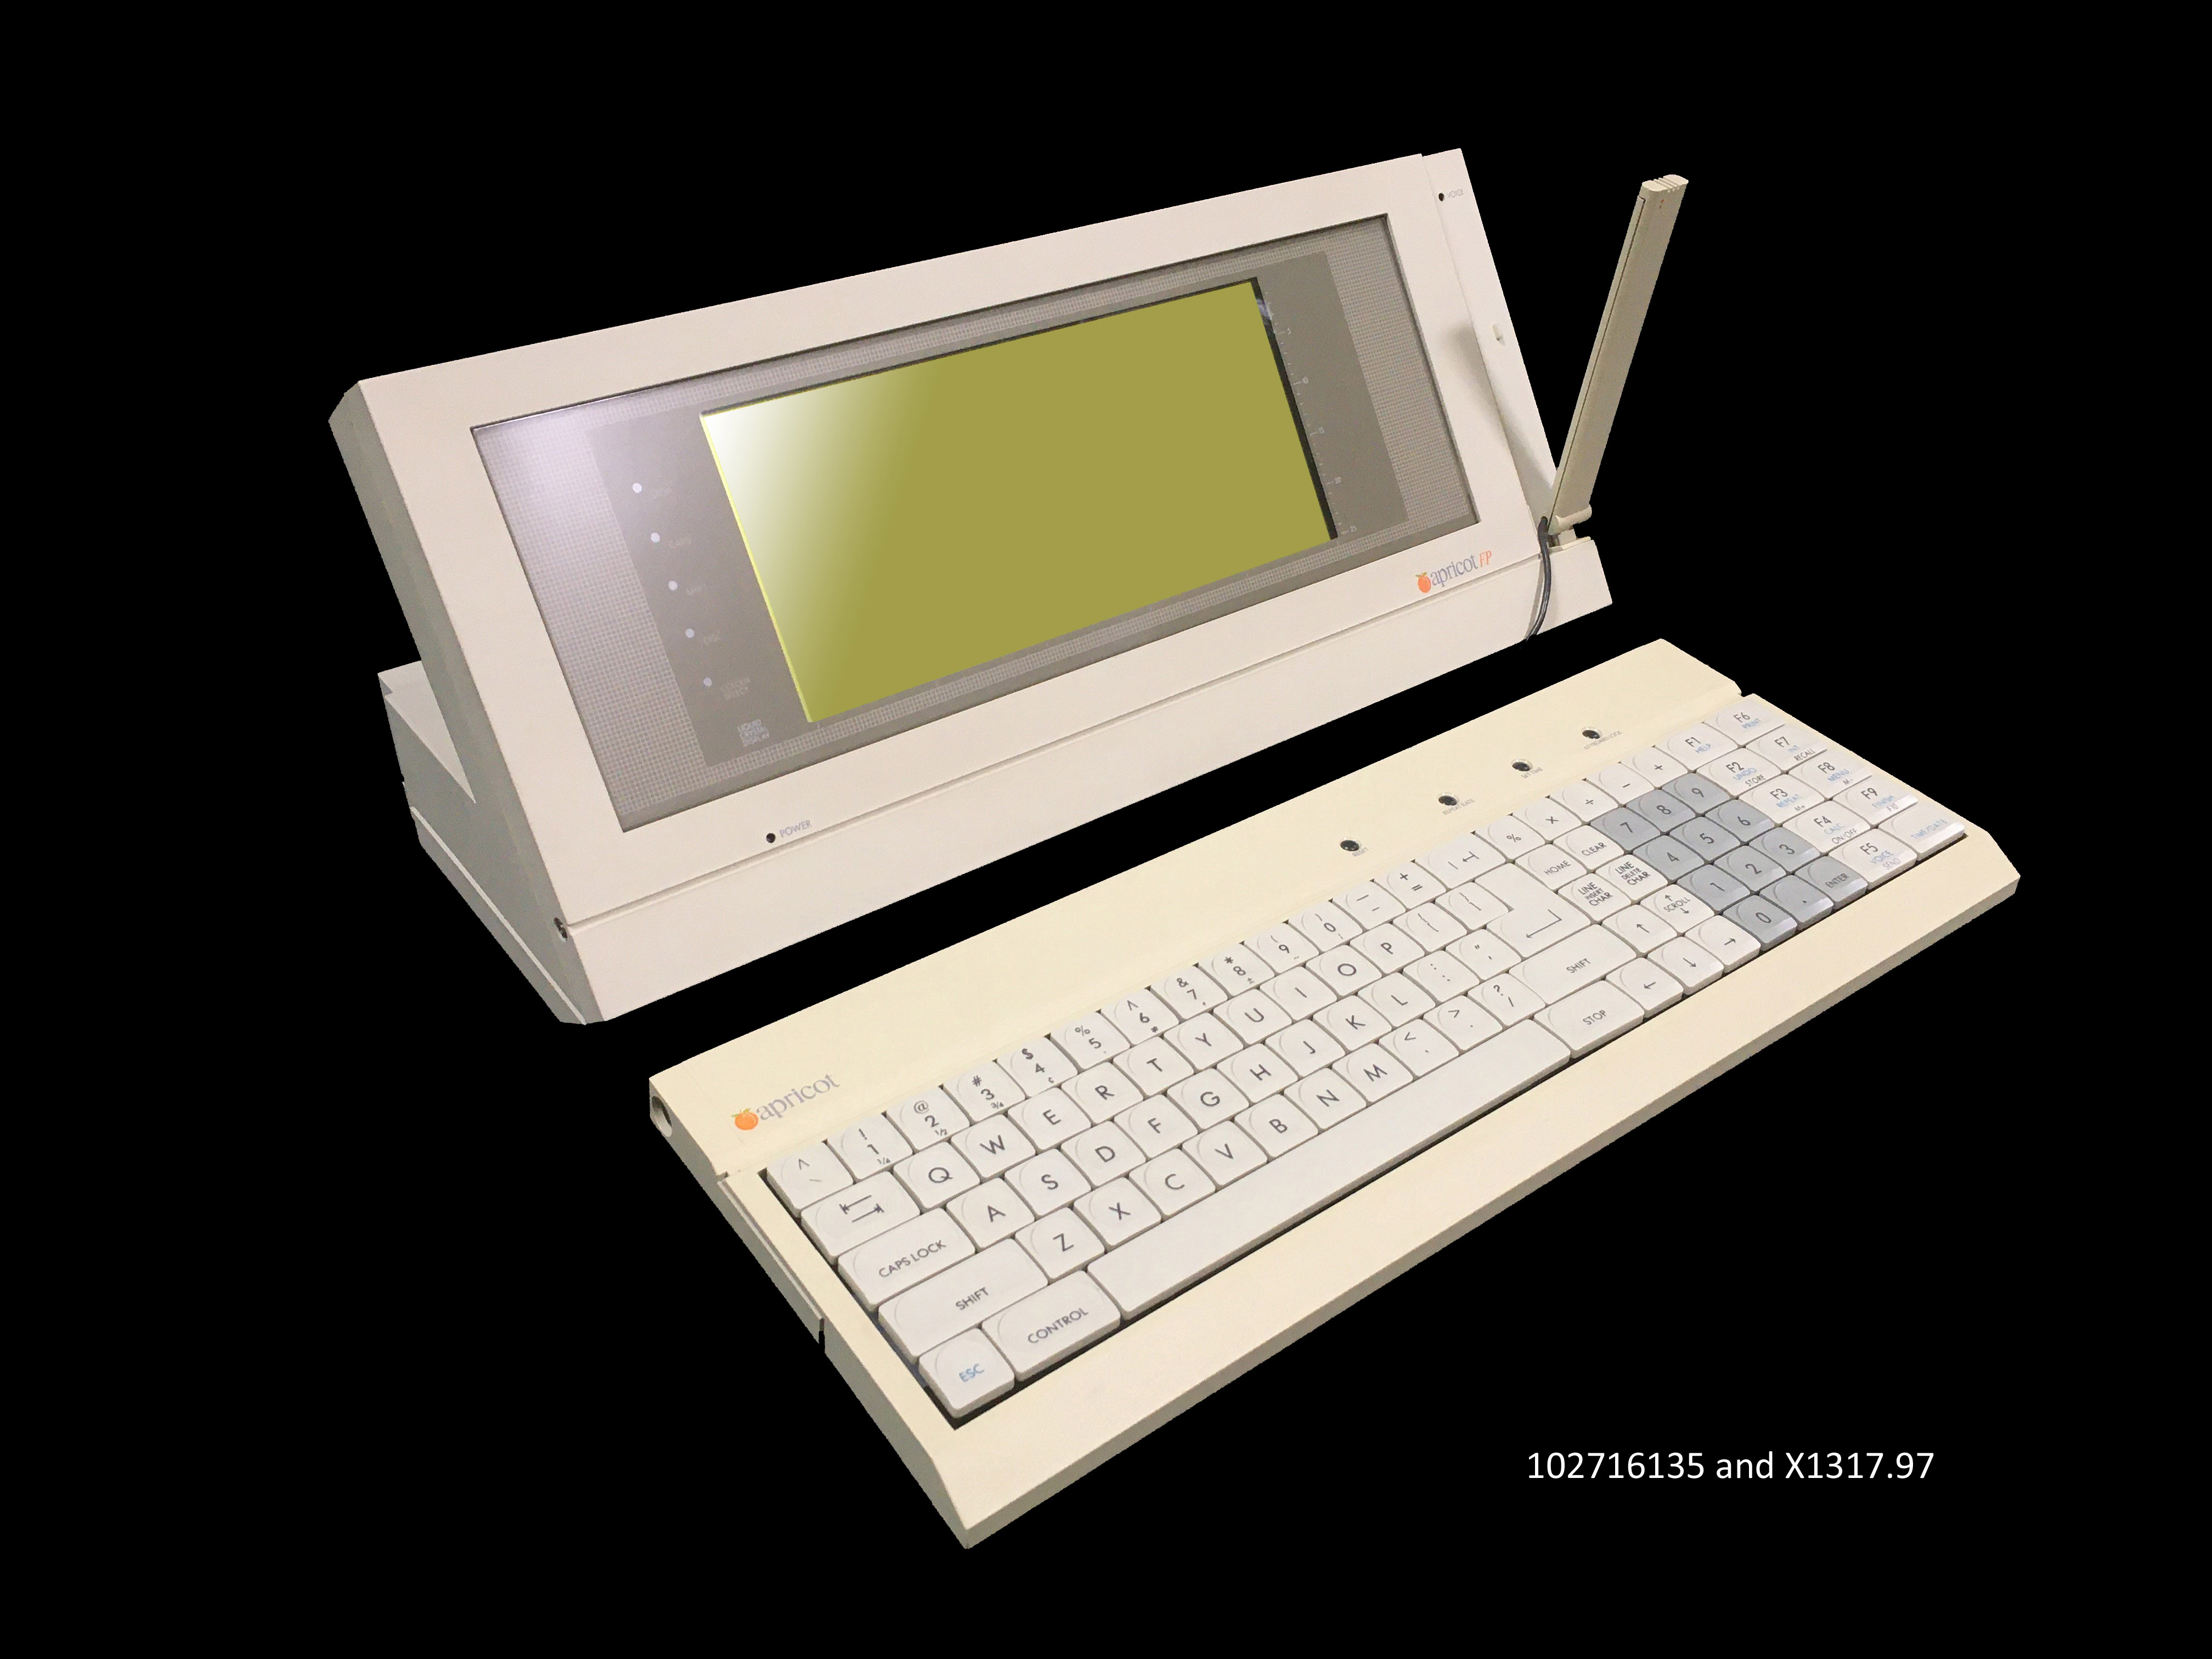 Apricot Portable | X1317.97 | Computer History Museum